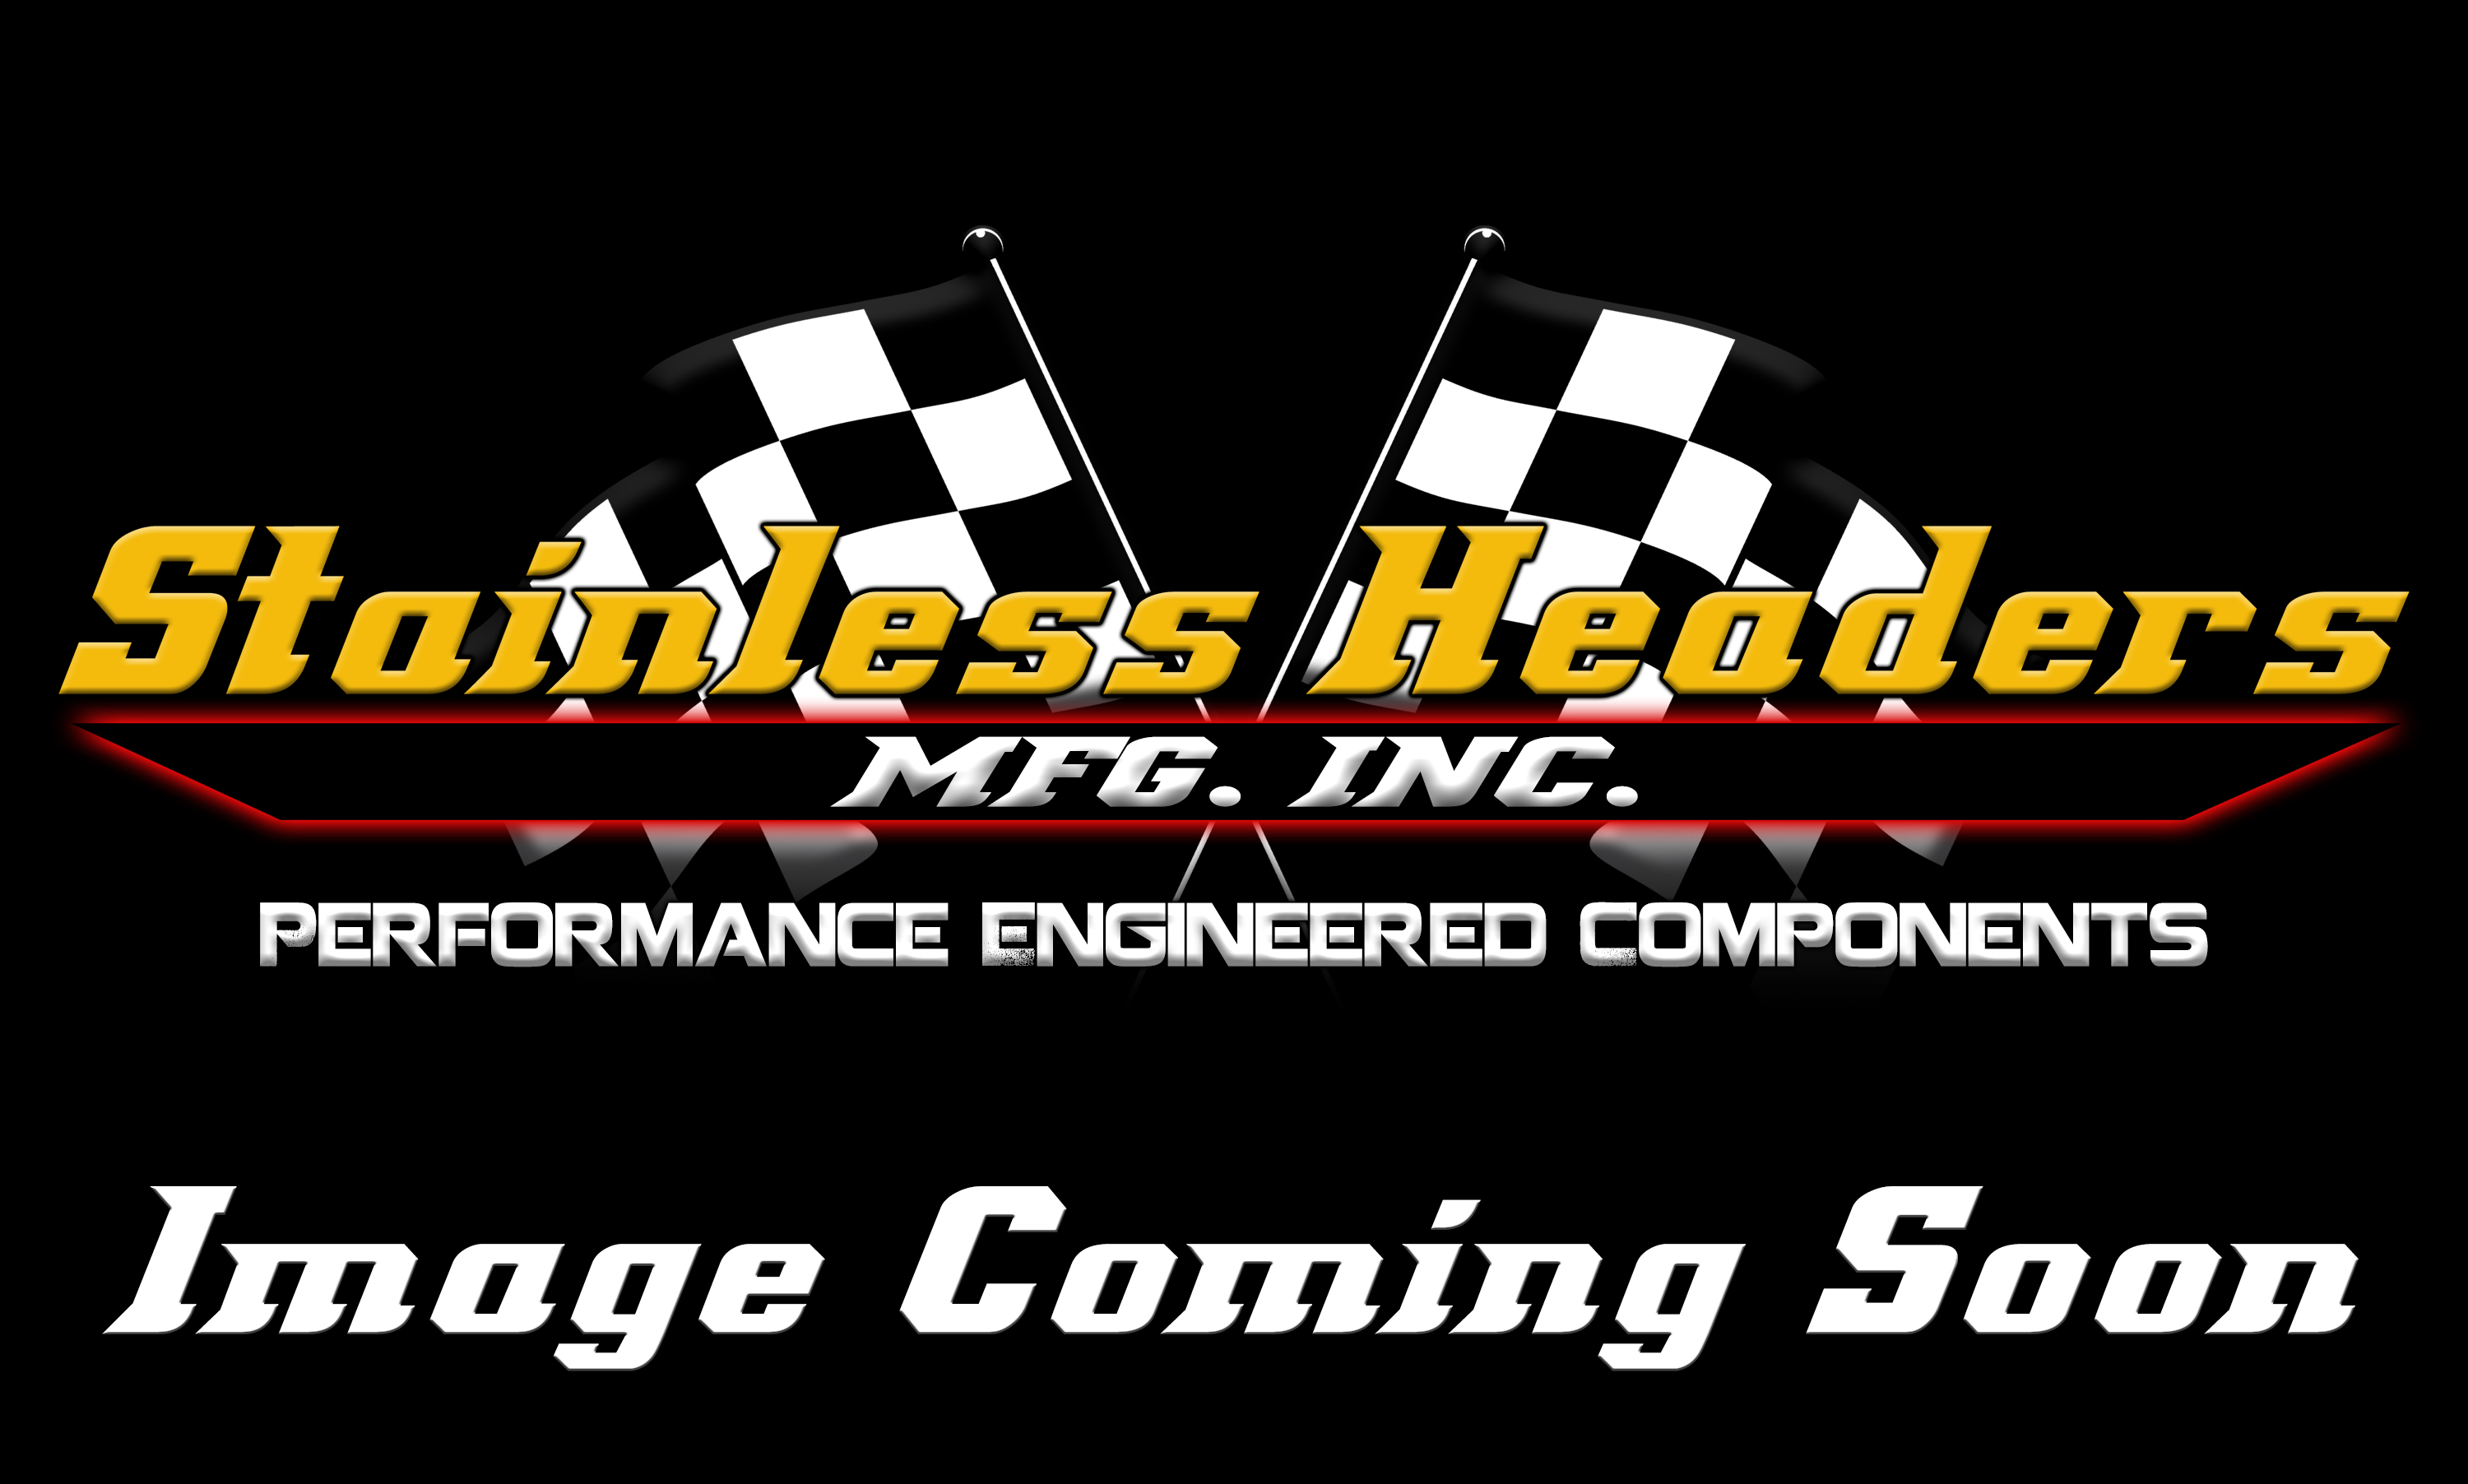 Stainless Headers - 1 7/8" Primary 2 into 1 Performance Merge Collector-16ga 321ss - Image 2